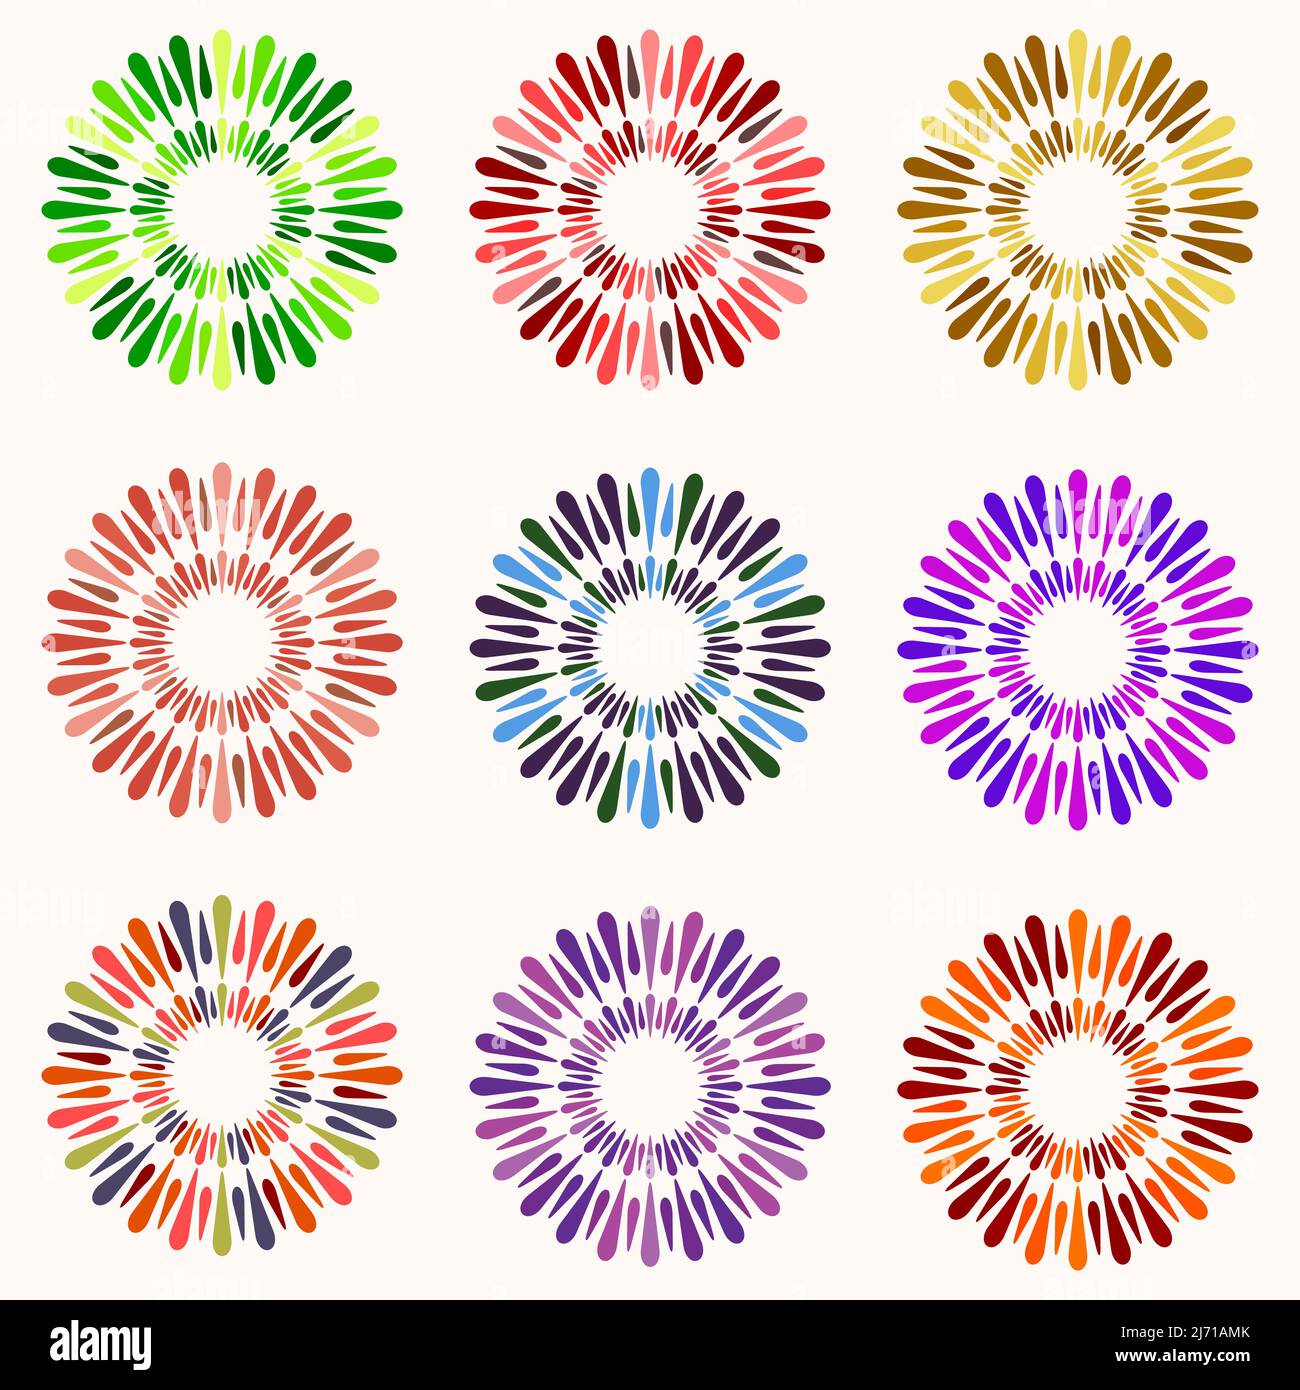 Abstract Colorful Circular Rounded Flower Shaped Elements Set Stock Vector